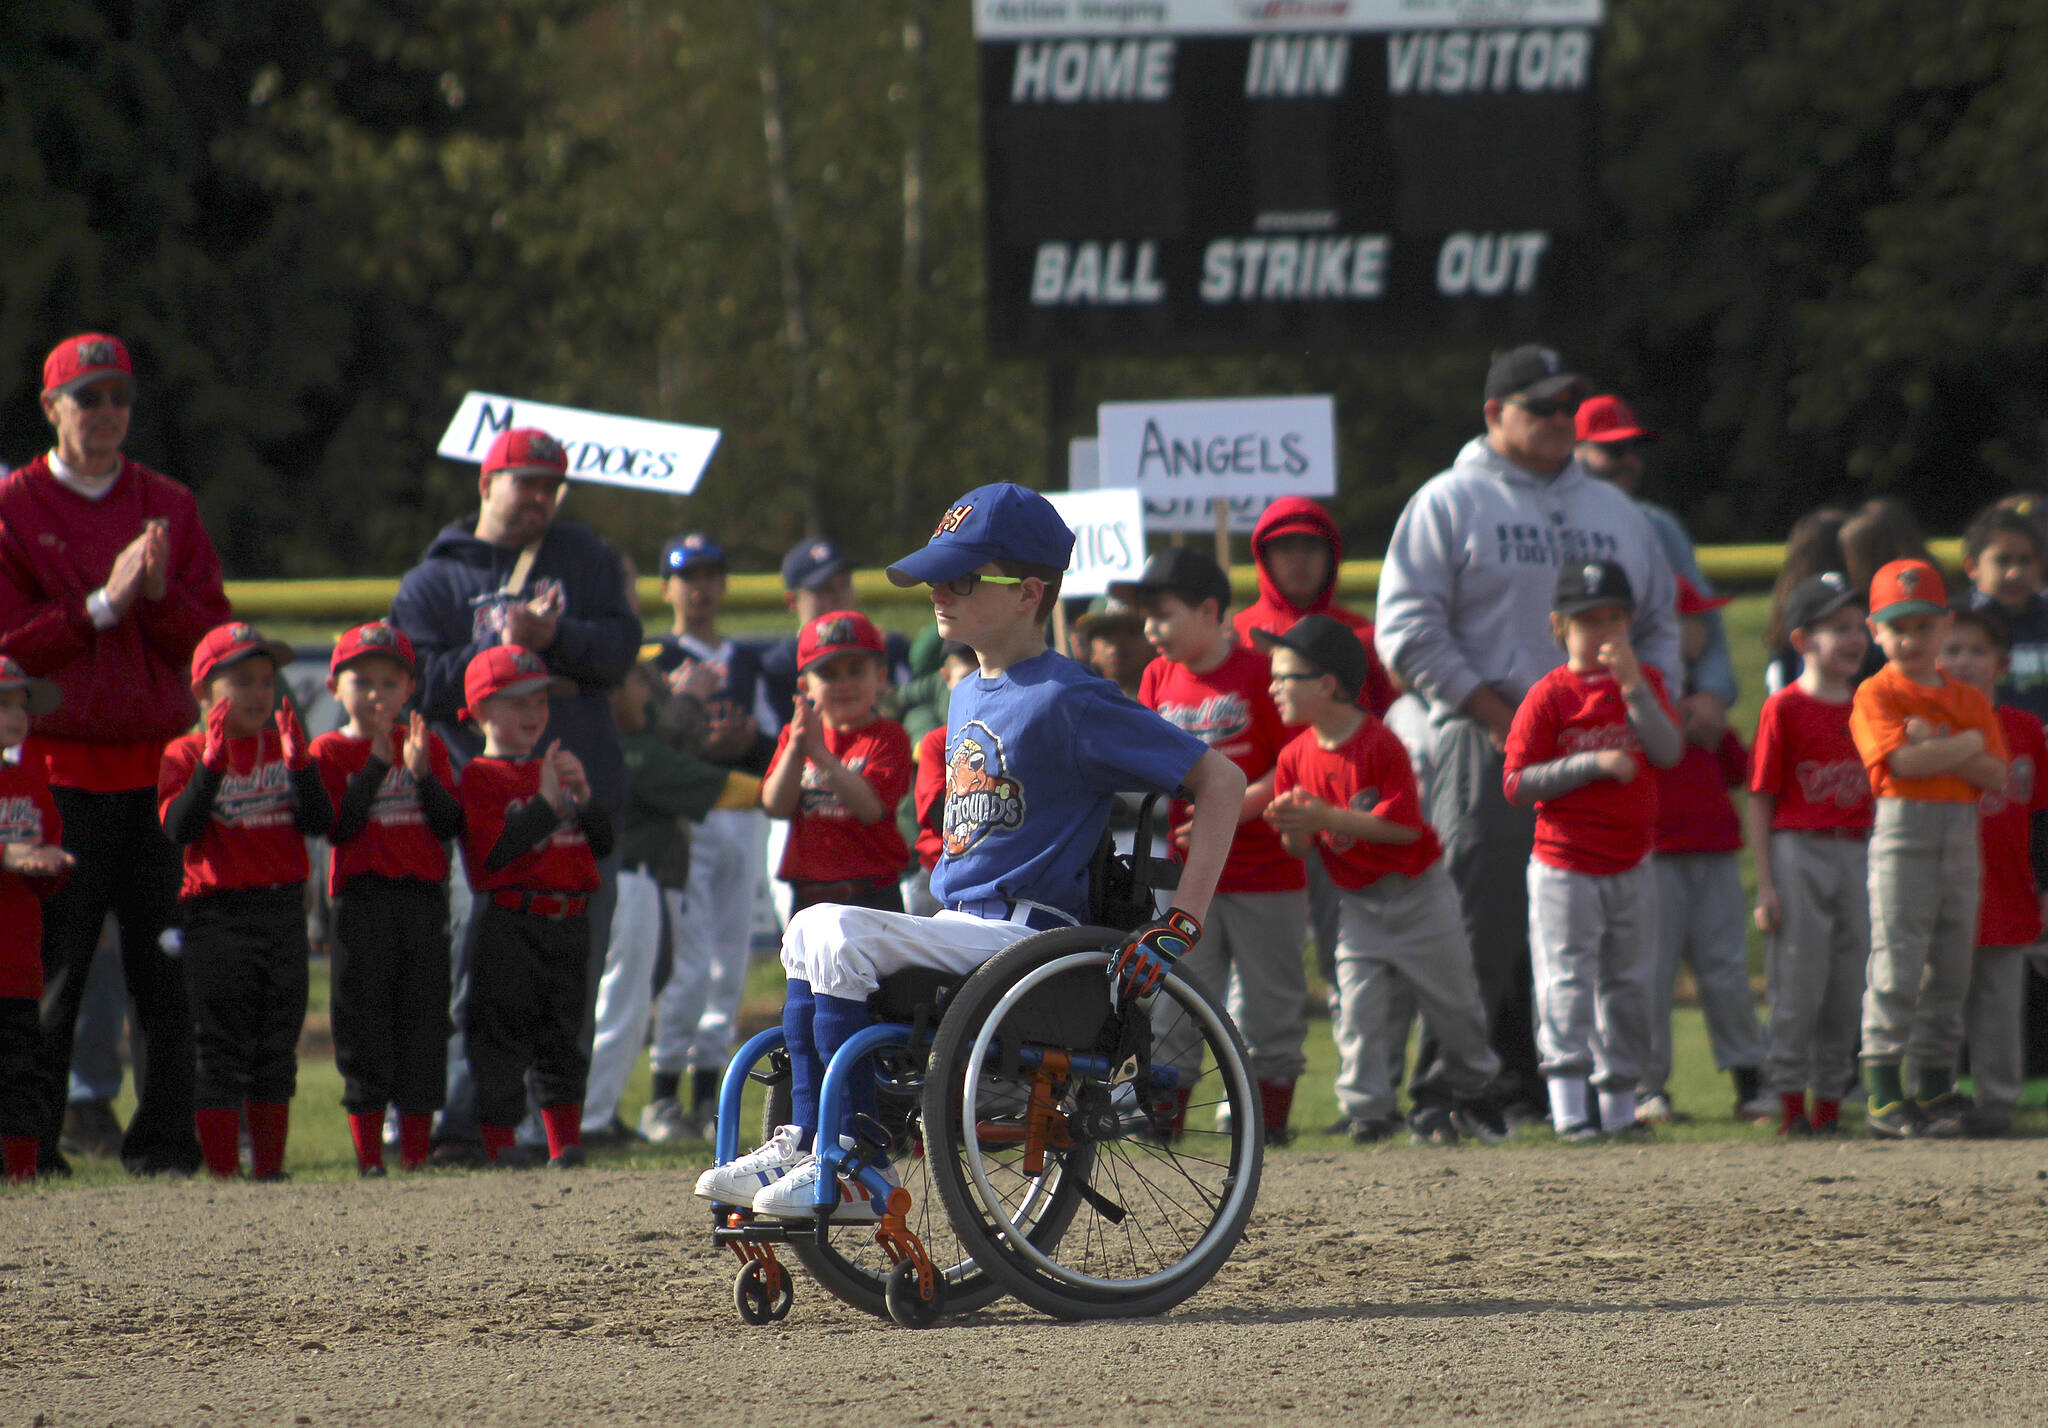 A member of the FWNLL Challenger division rounds the bases on April 23. Olivia Sullivan/the Mirror